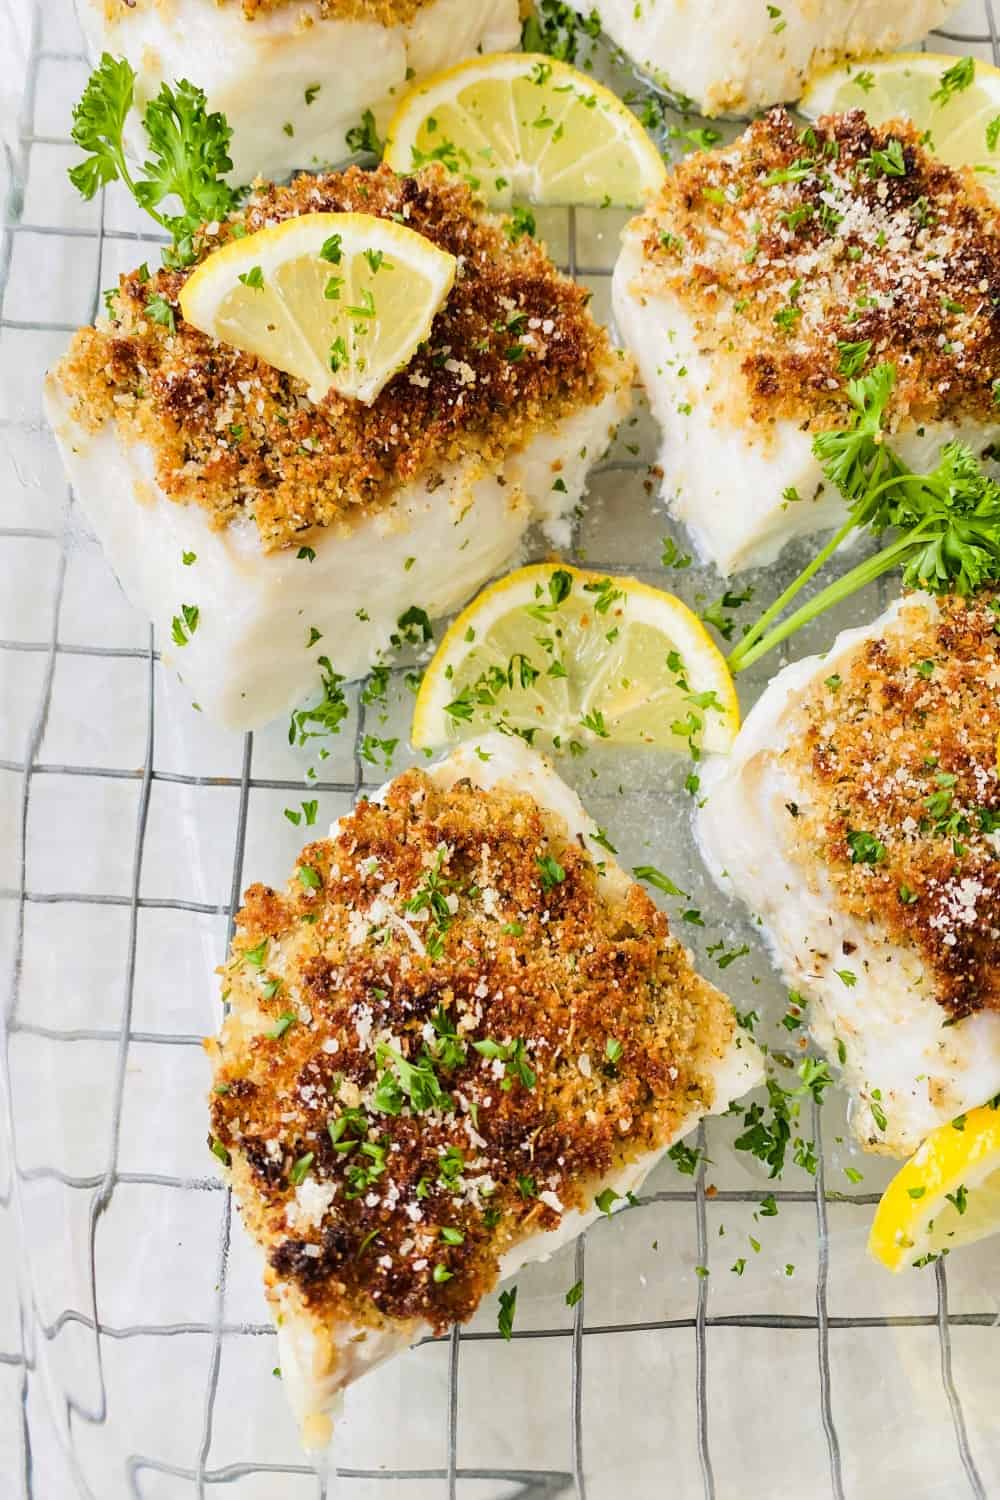 oven baked cod with Parmesan bread crumbs for oreganata